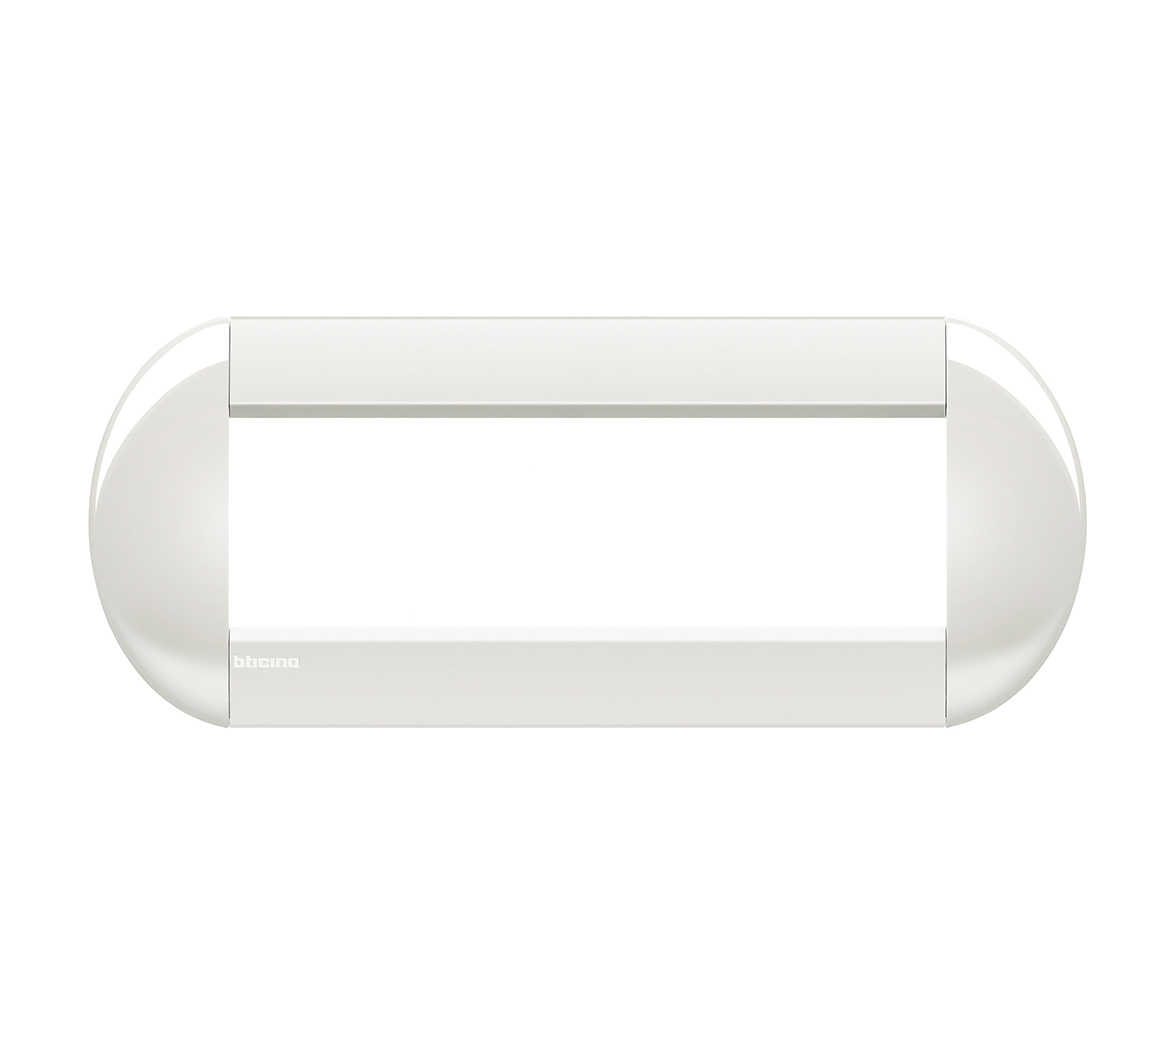 Ll - placca 7p 216x68 mm colore bianco